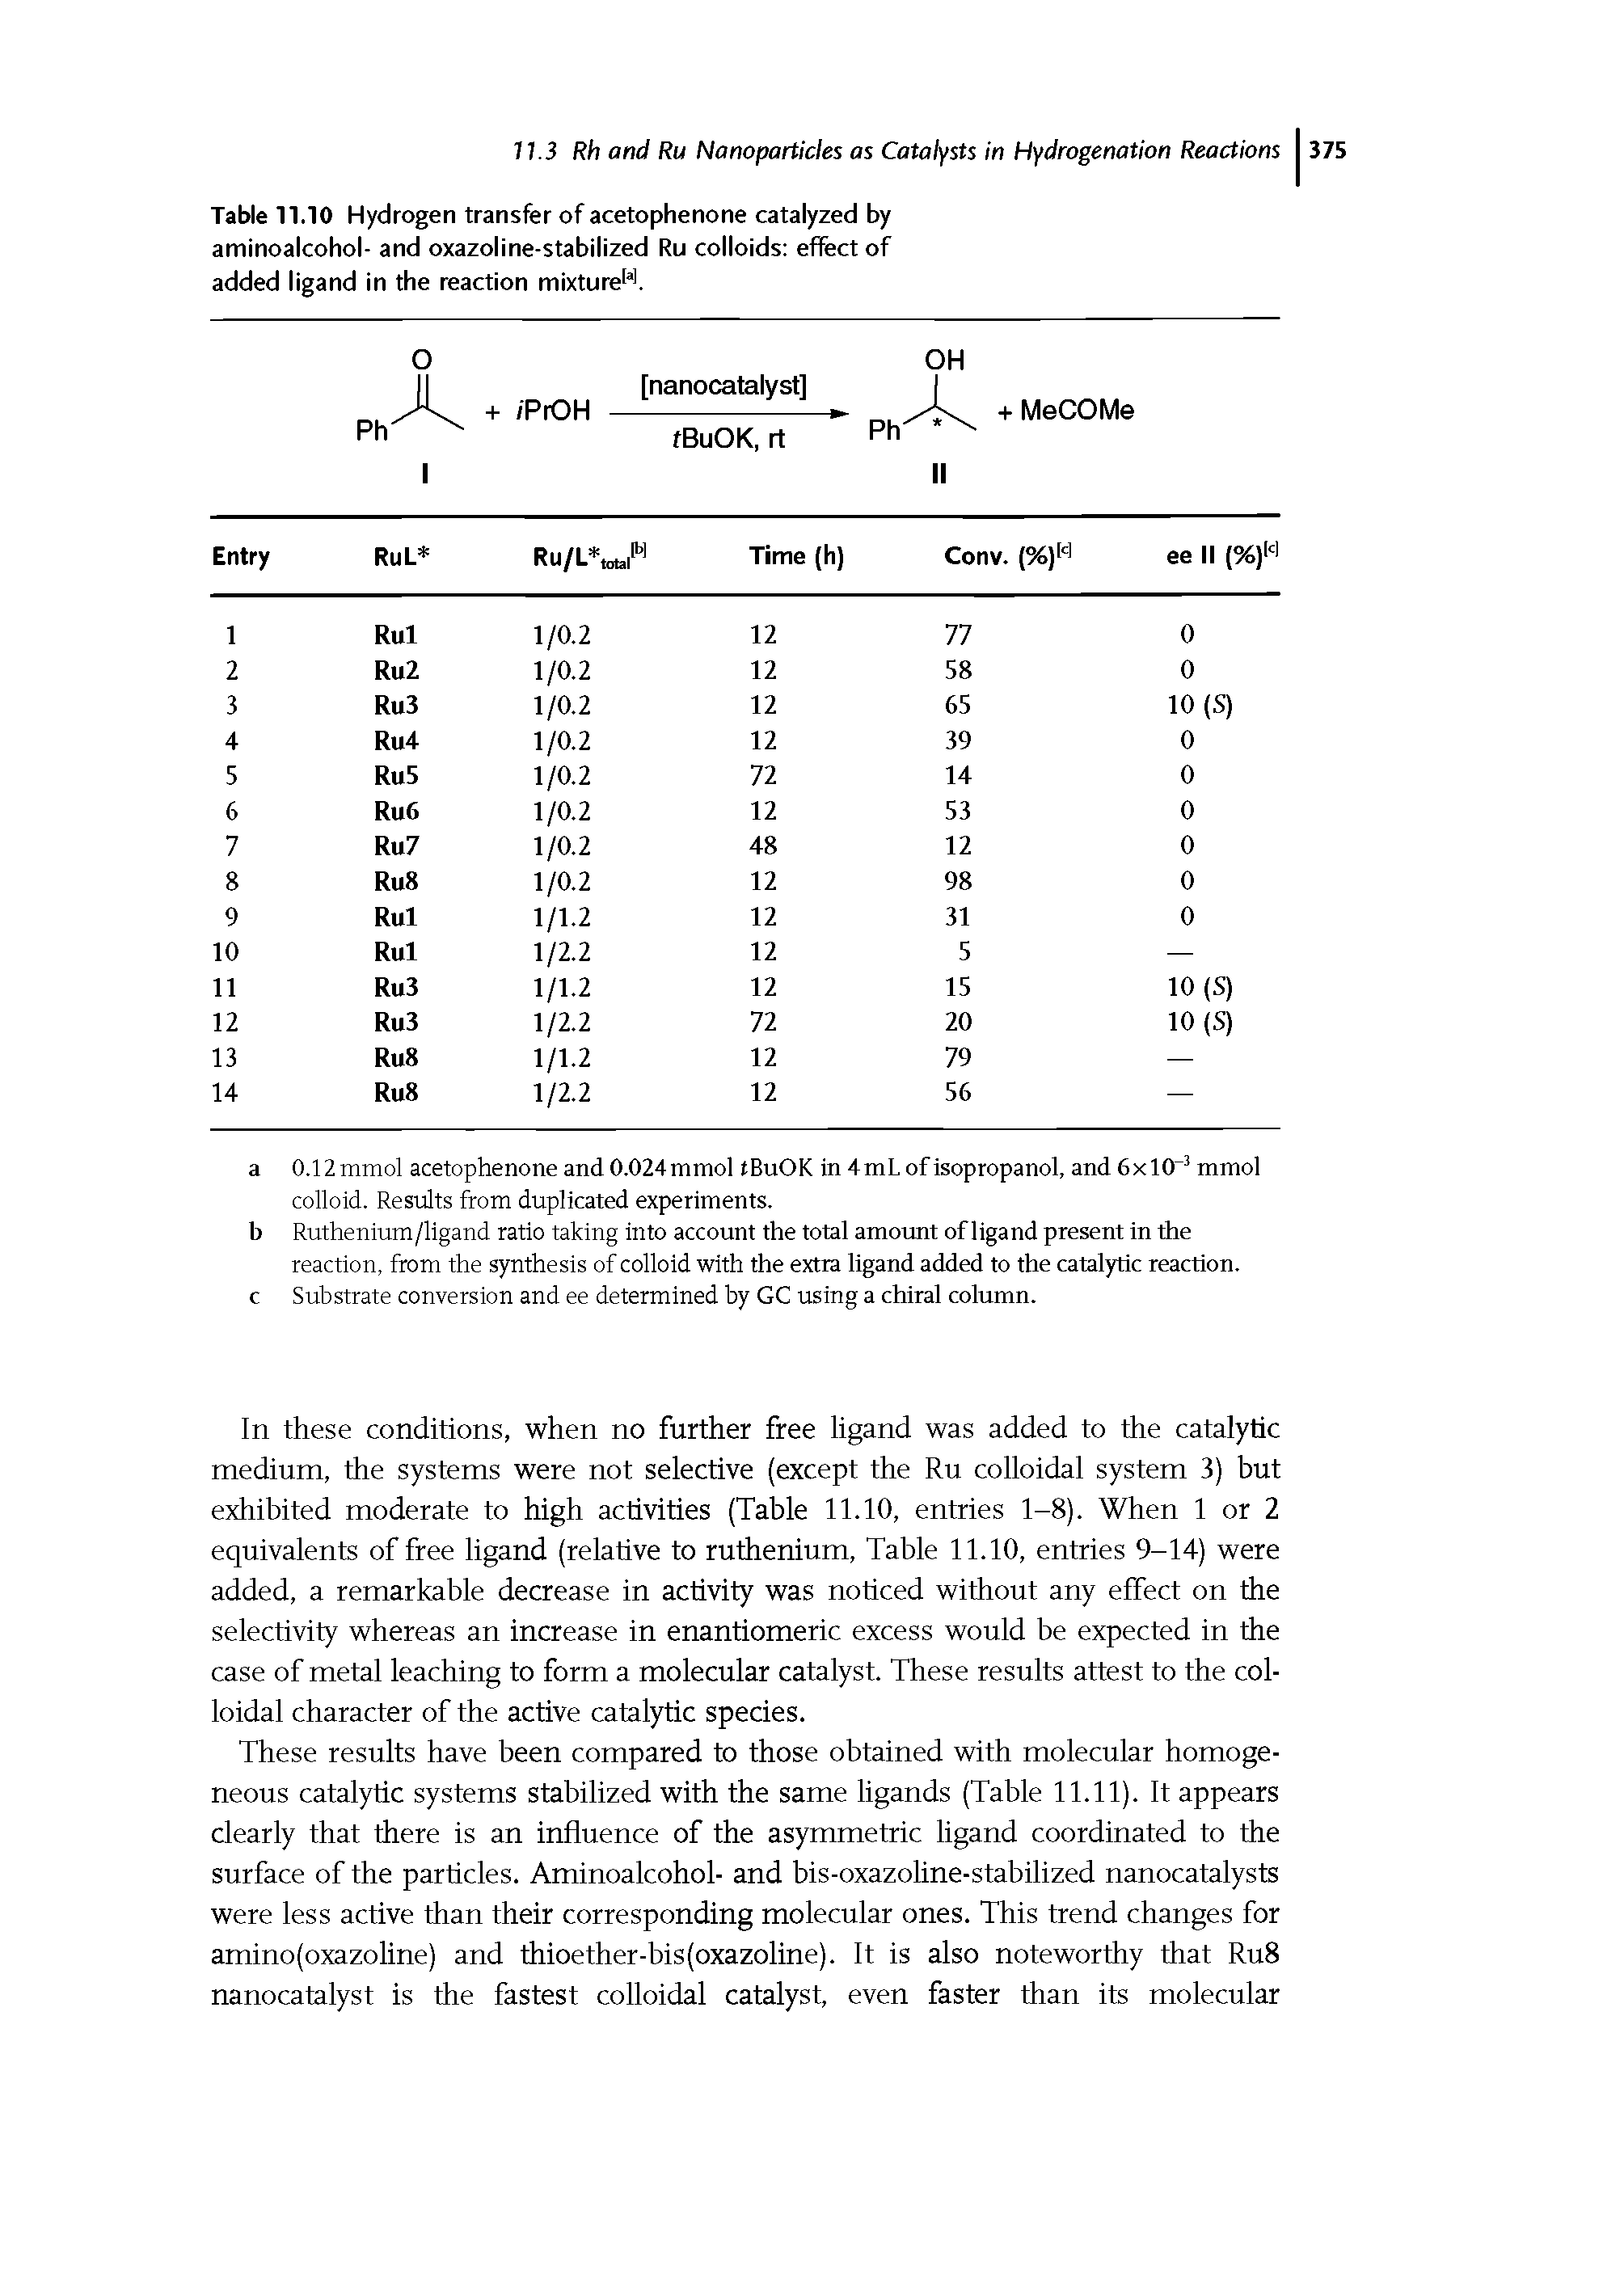 Table 11.10 Hydrogen transfer of acetophenone catalyzed by amlnoalcohol- and oxazoline-stabilized Ru colloids effect of added ligand in the reaction mixturei i.